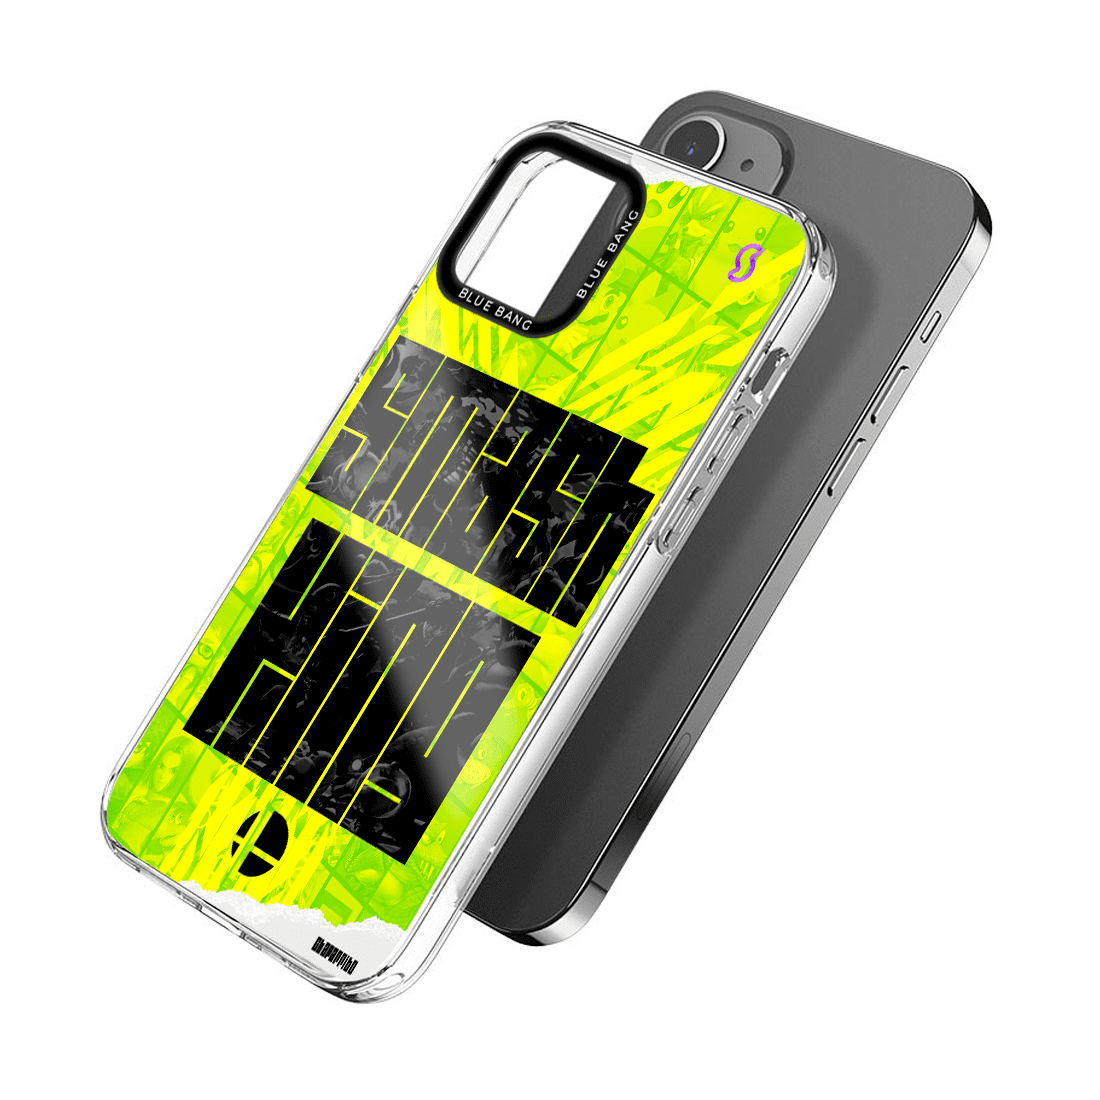 Smash king holographic cell phone case Chaparrito